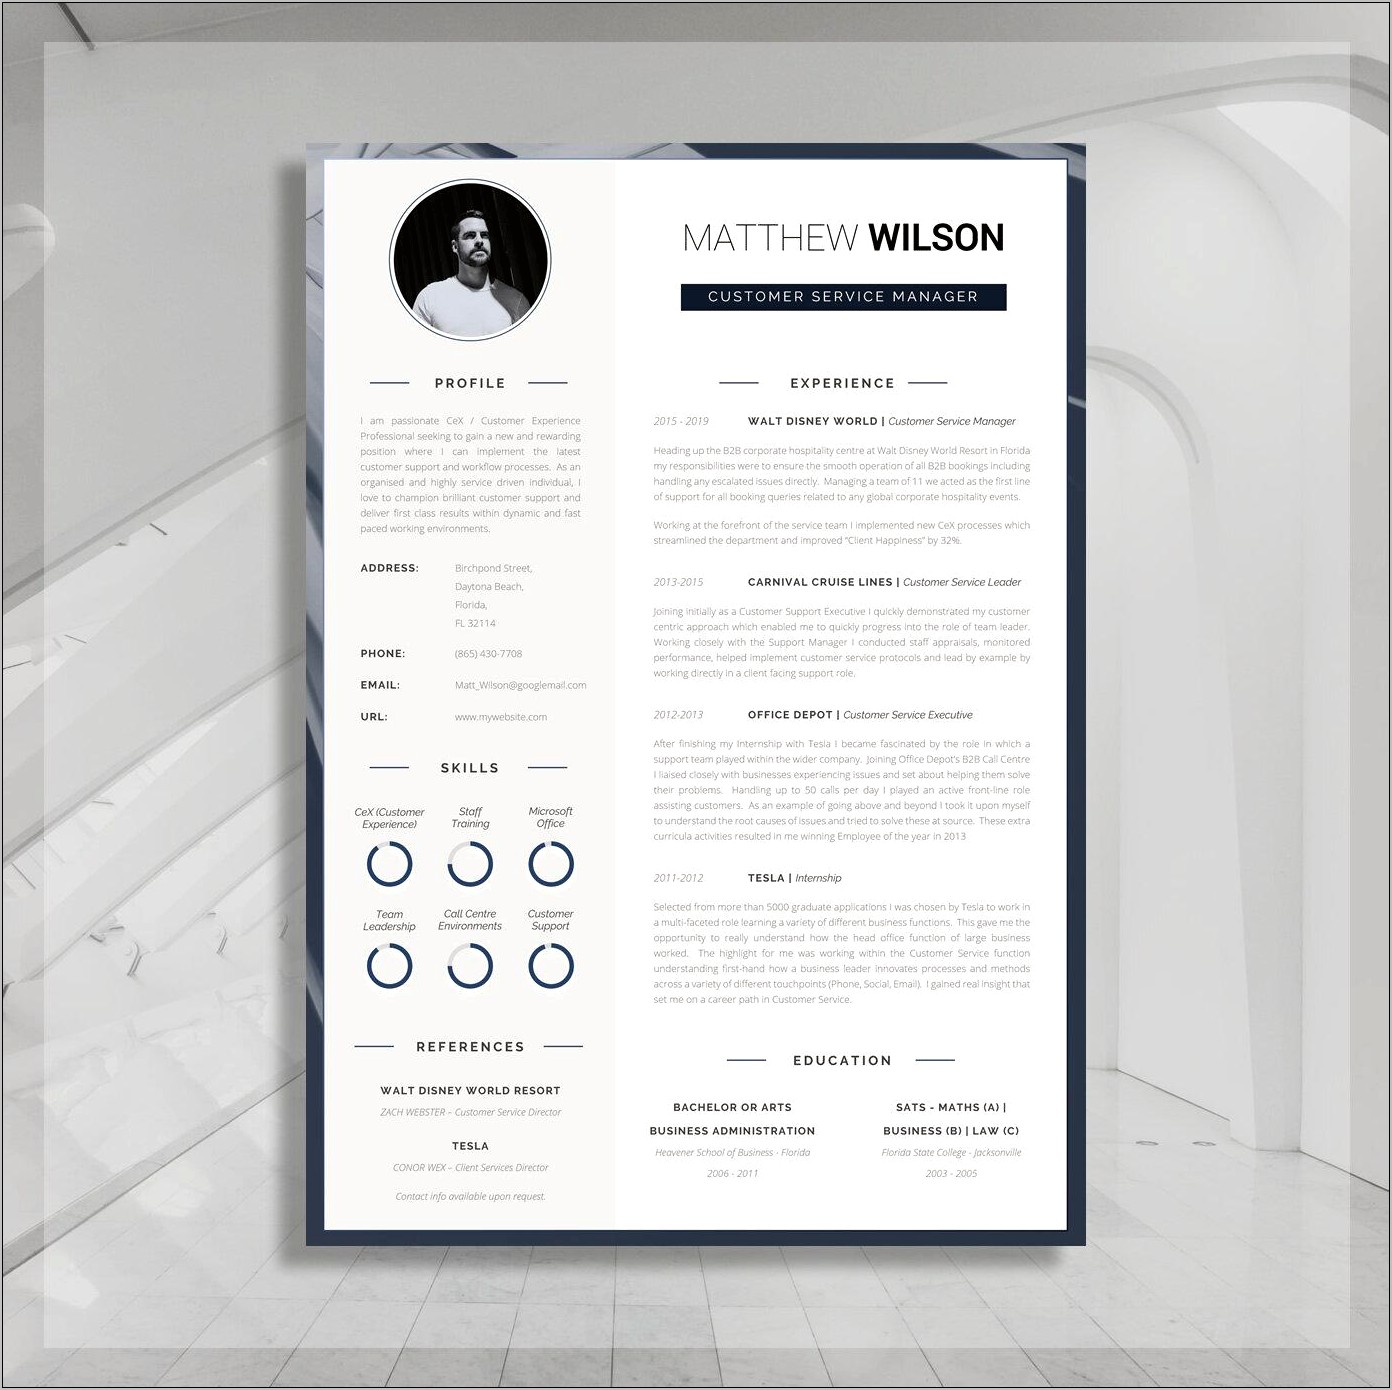 Resume Word 2013 Template Filled Out